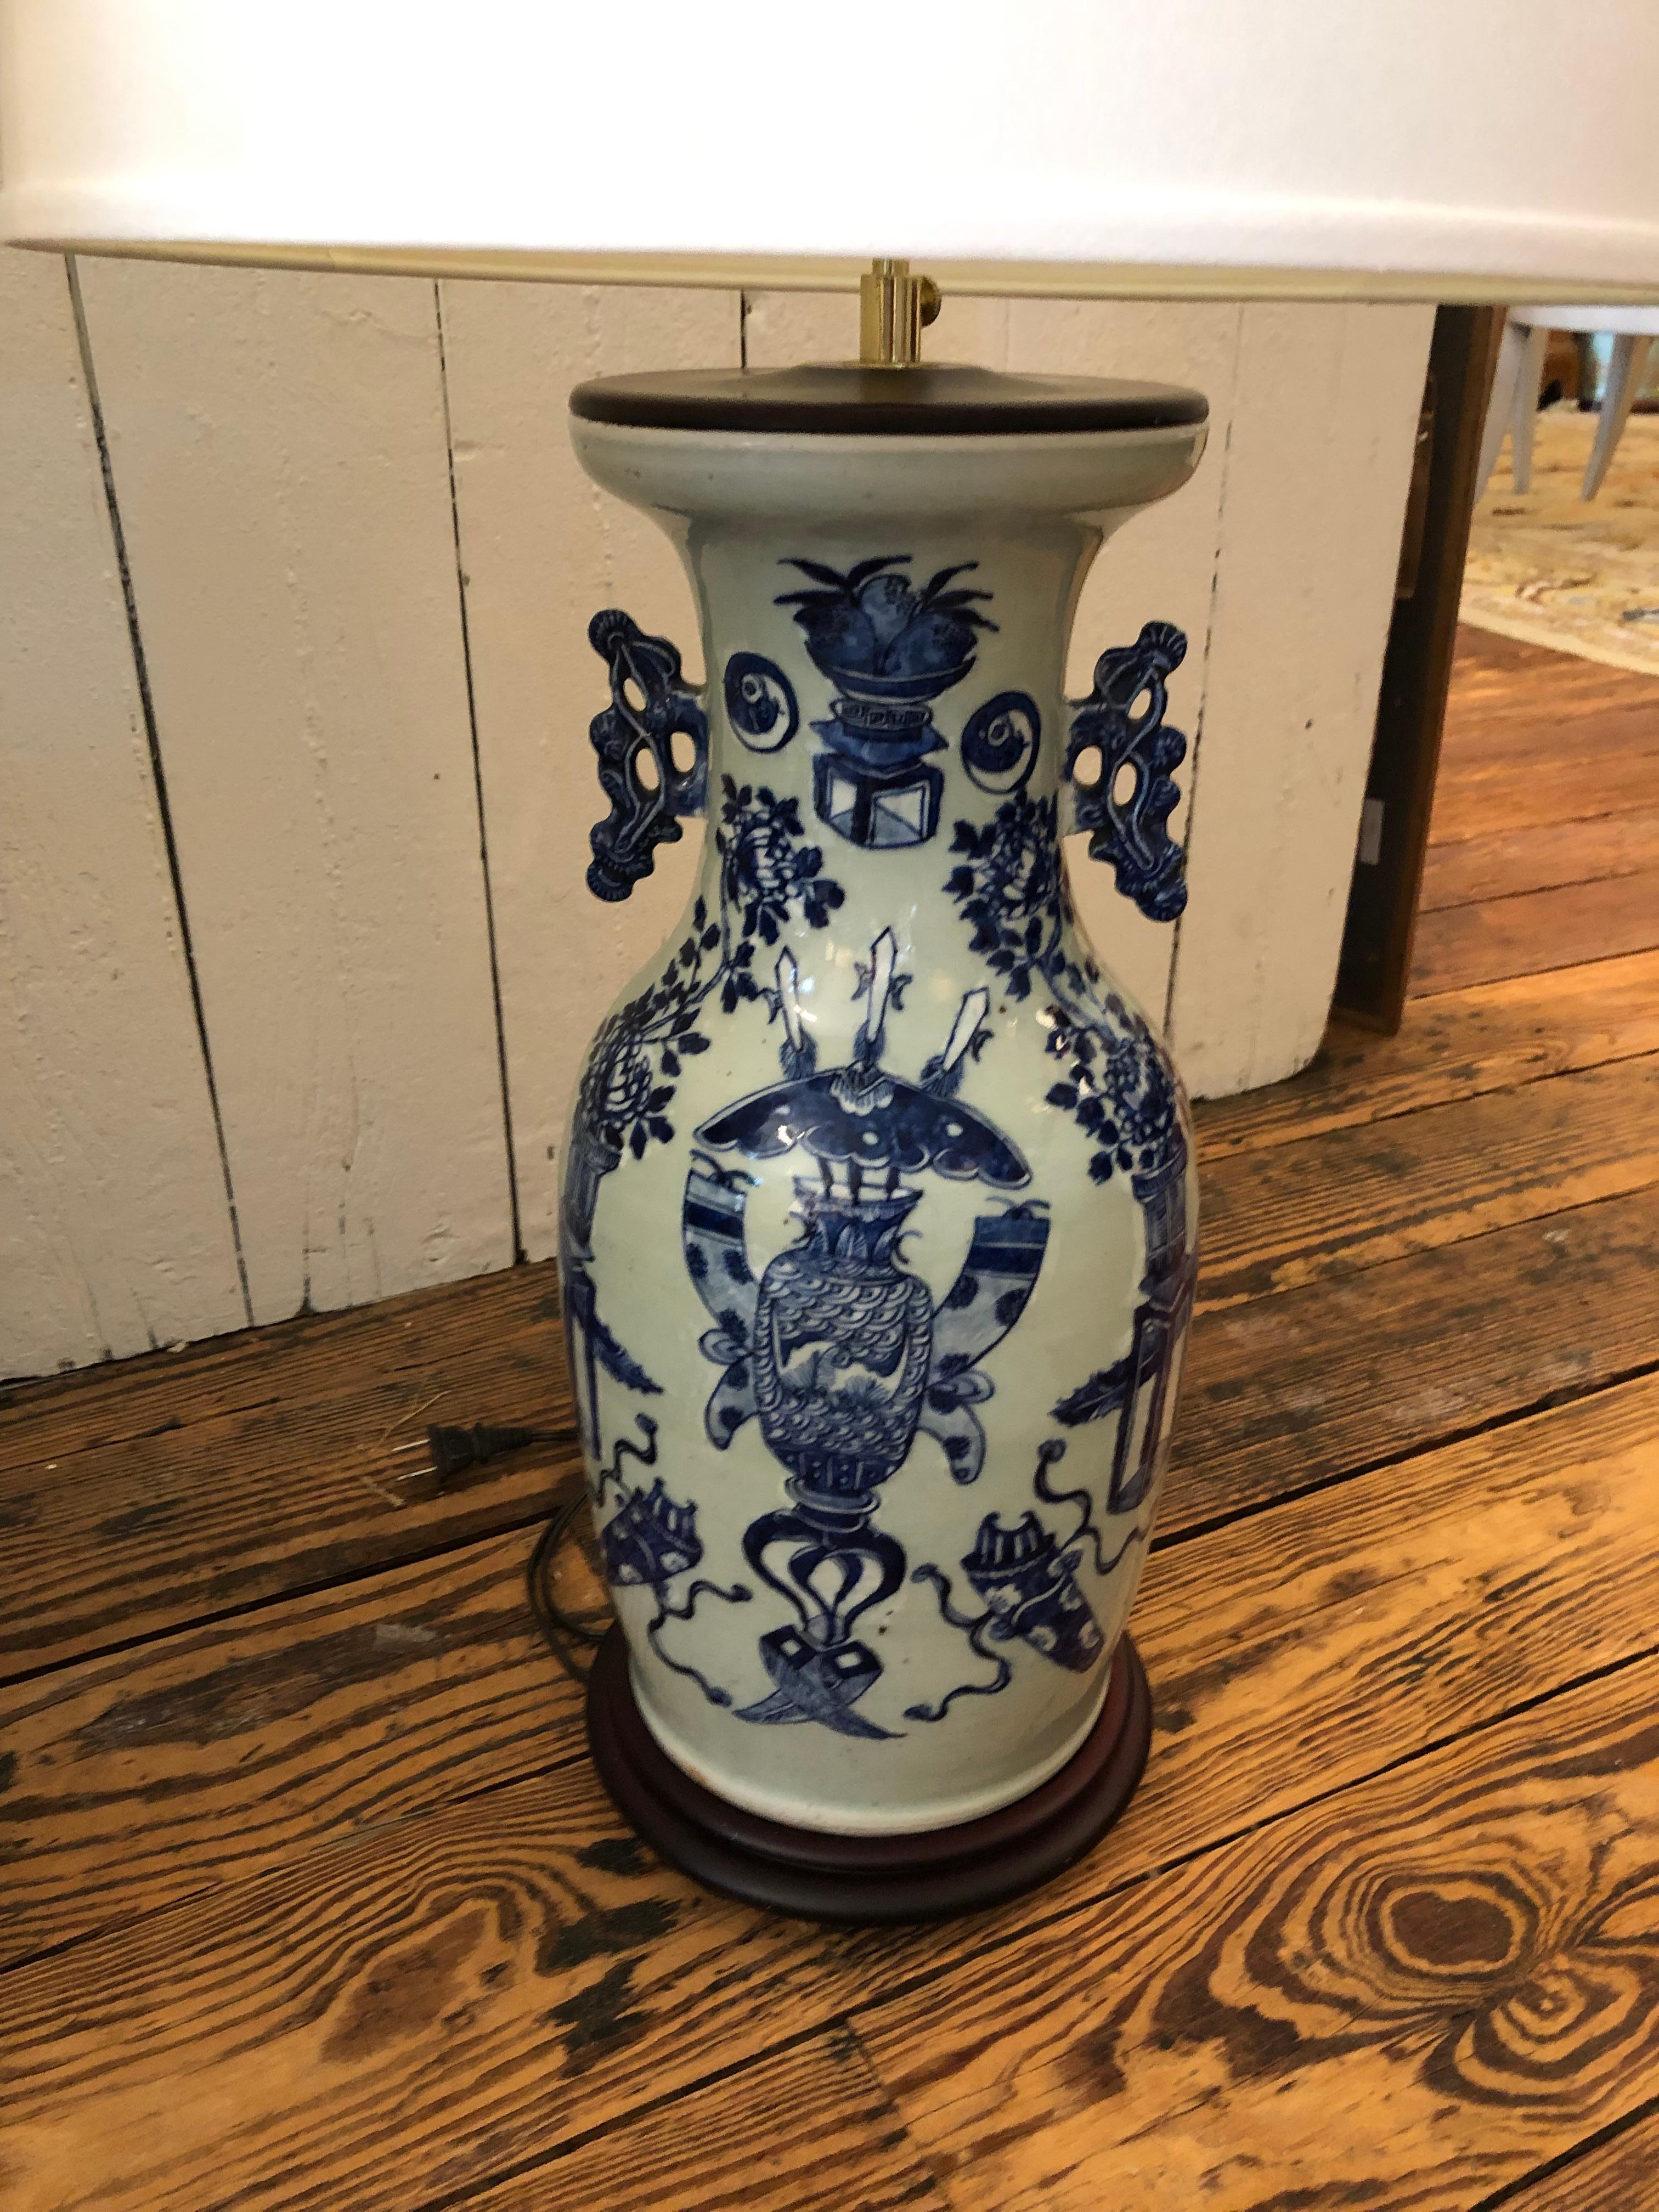 Handsome large pair of slightly different blue and white Chinese vase shaped antique table lamps having lovely decoration and wooden bases. Vases are 18.25 h
One lamp is 32.5 h; the other 30.5 probably due to harp differences
Bases are 8